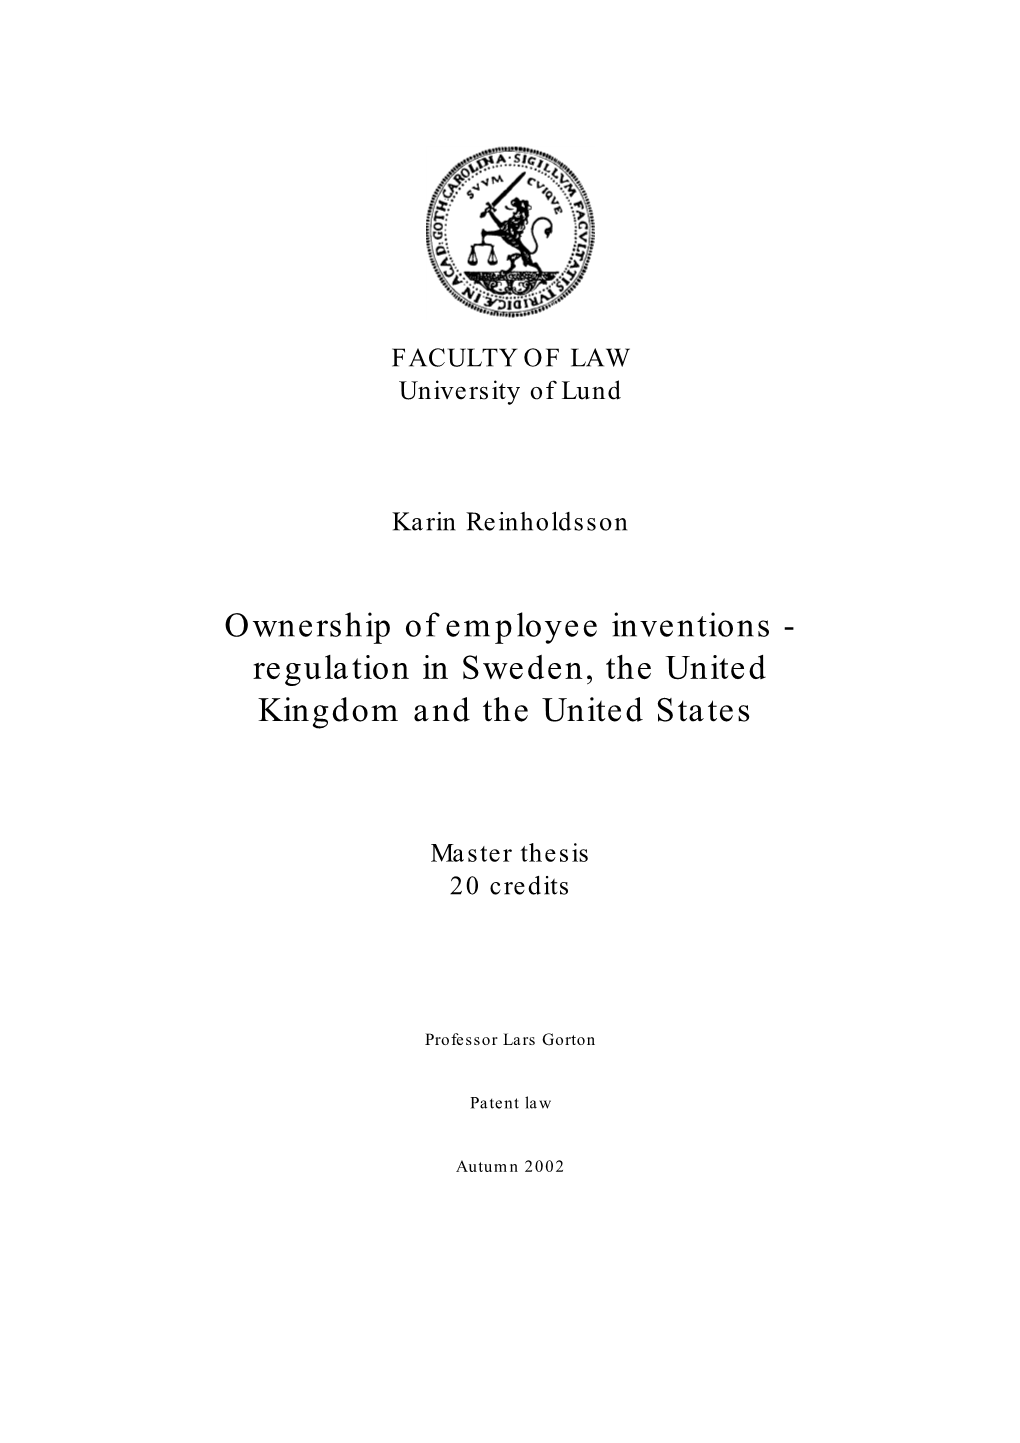 Ownership of Employee Inventions - Regulation in Sweden, the United Kingdom and the United States